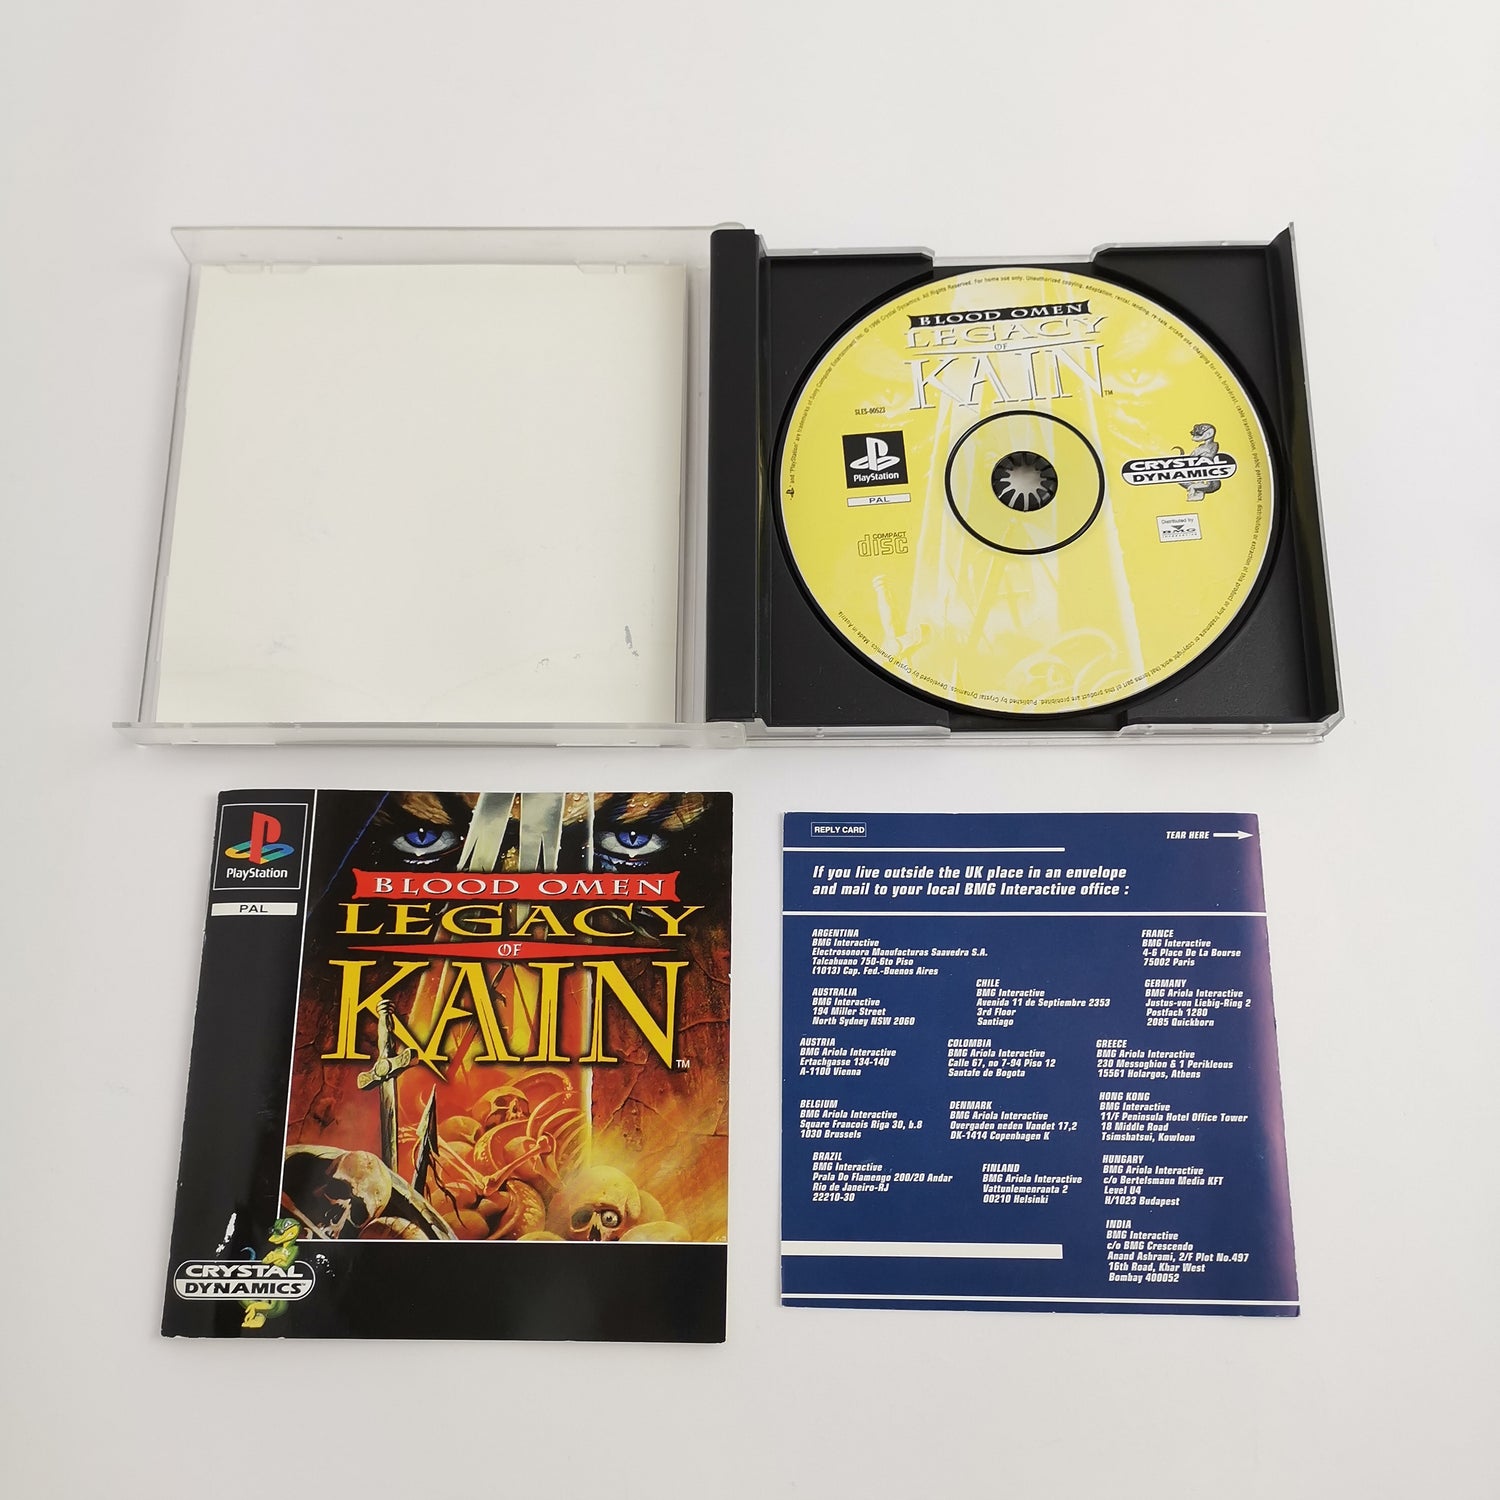 Sony Playstation 1 Spiel : Blood Omen Legacy of Kain | PS1 PSX - OVP PAL